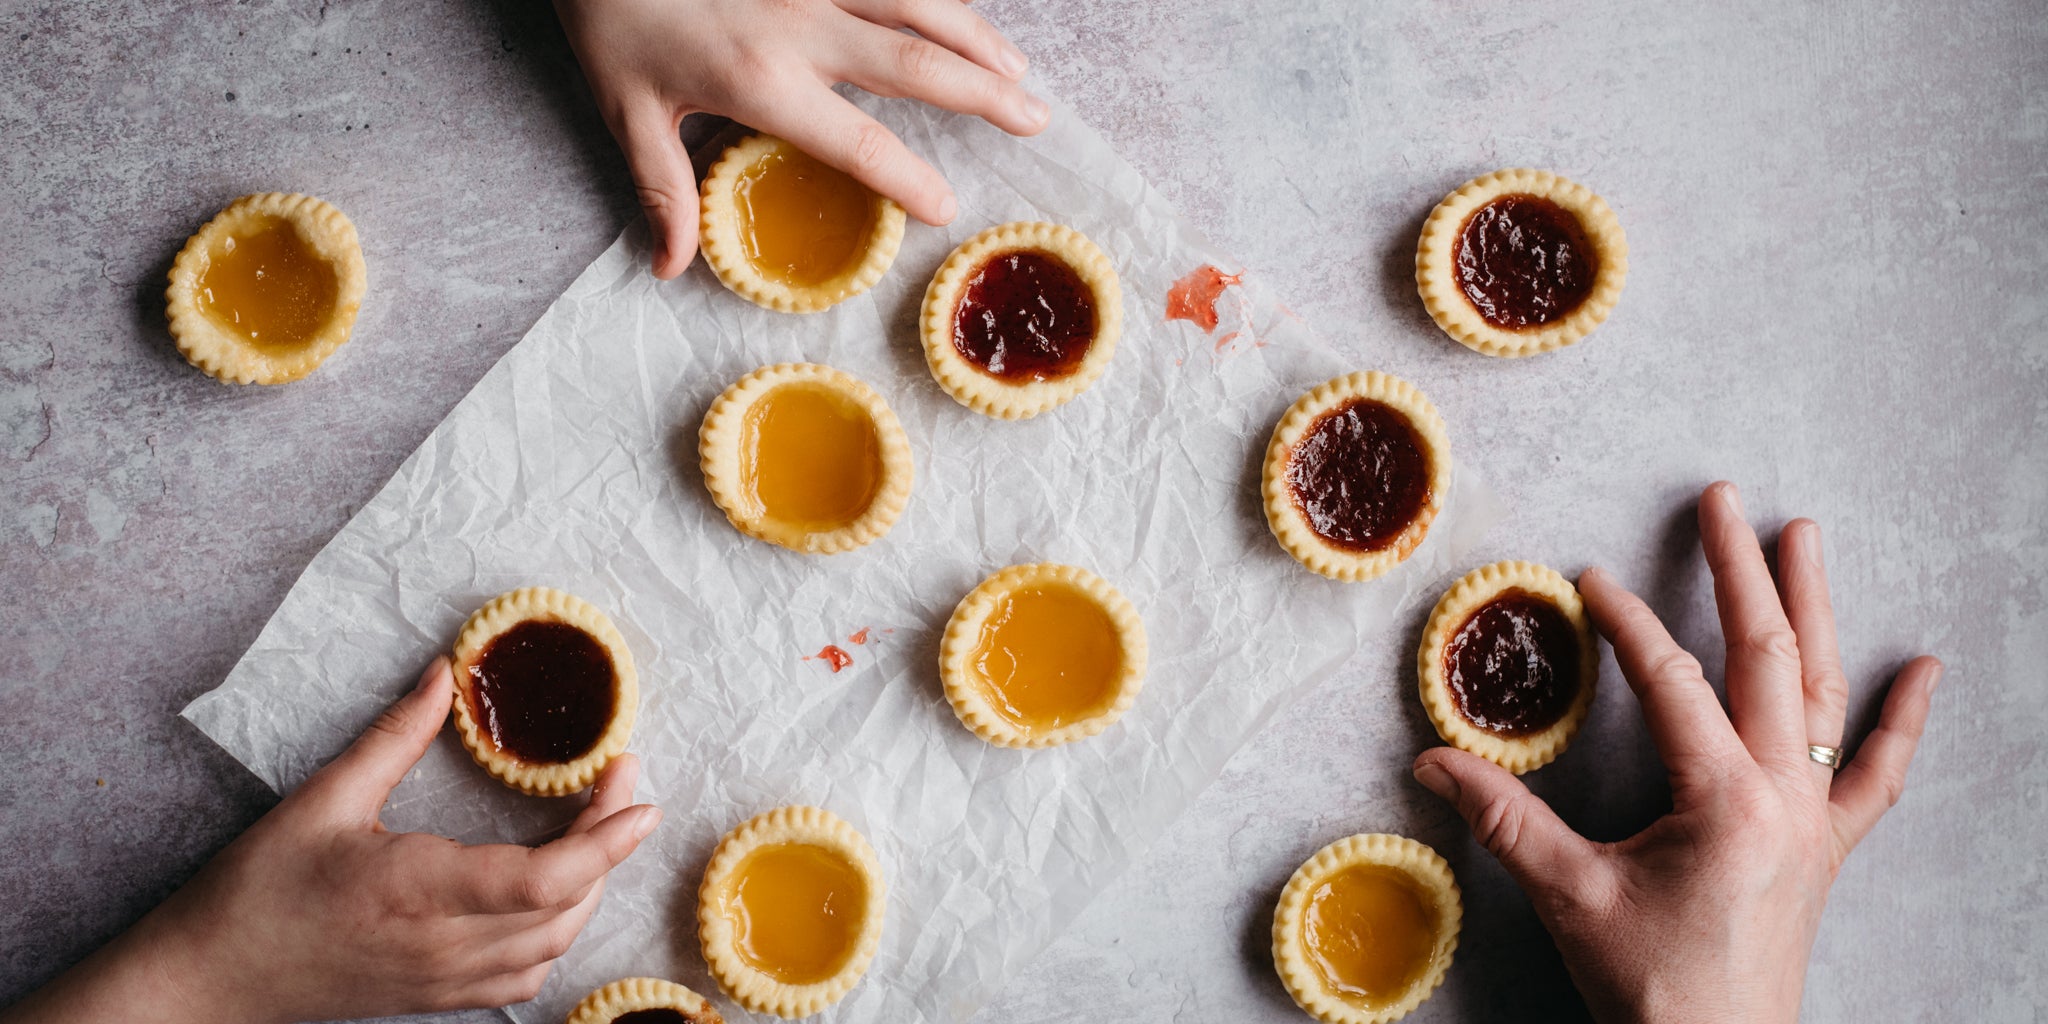 Hands reaching for a jam tart, with Apricot & Strawberry Jam Tarts served on parchment paper